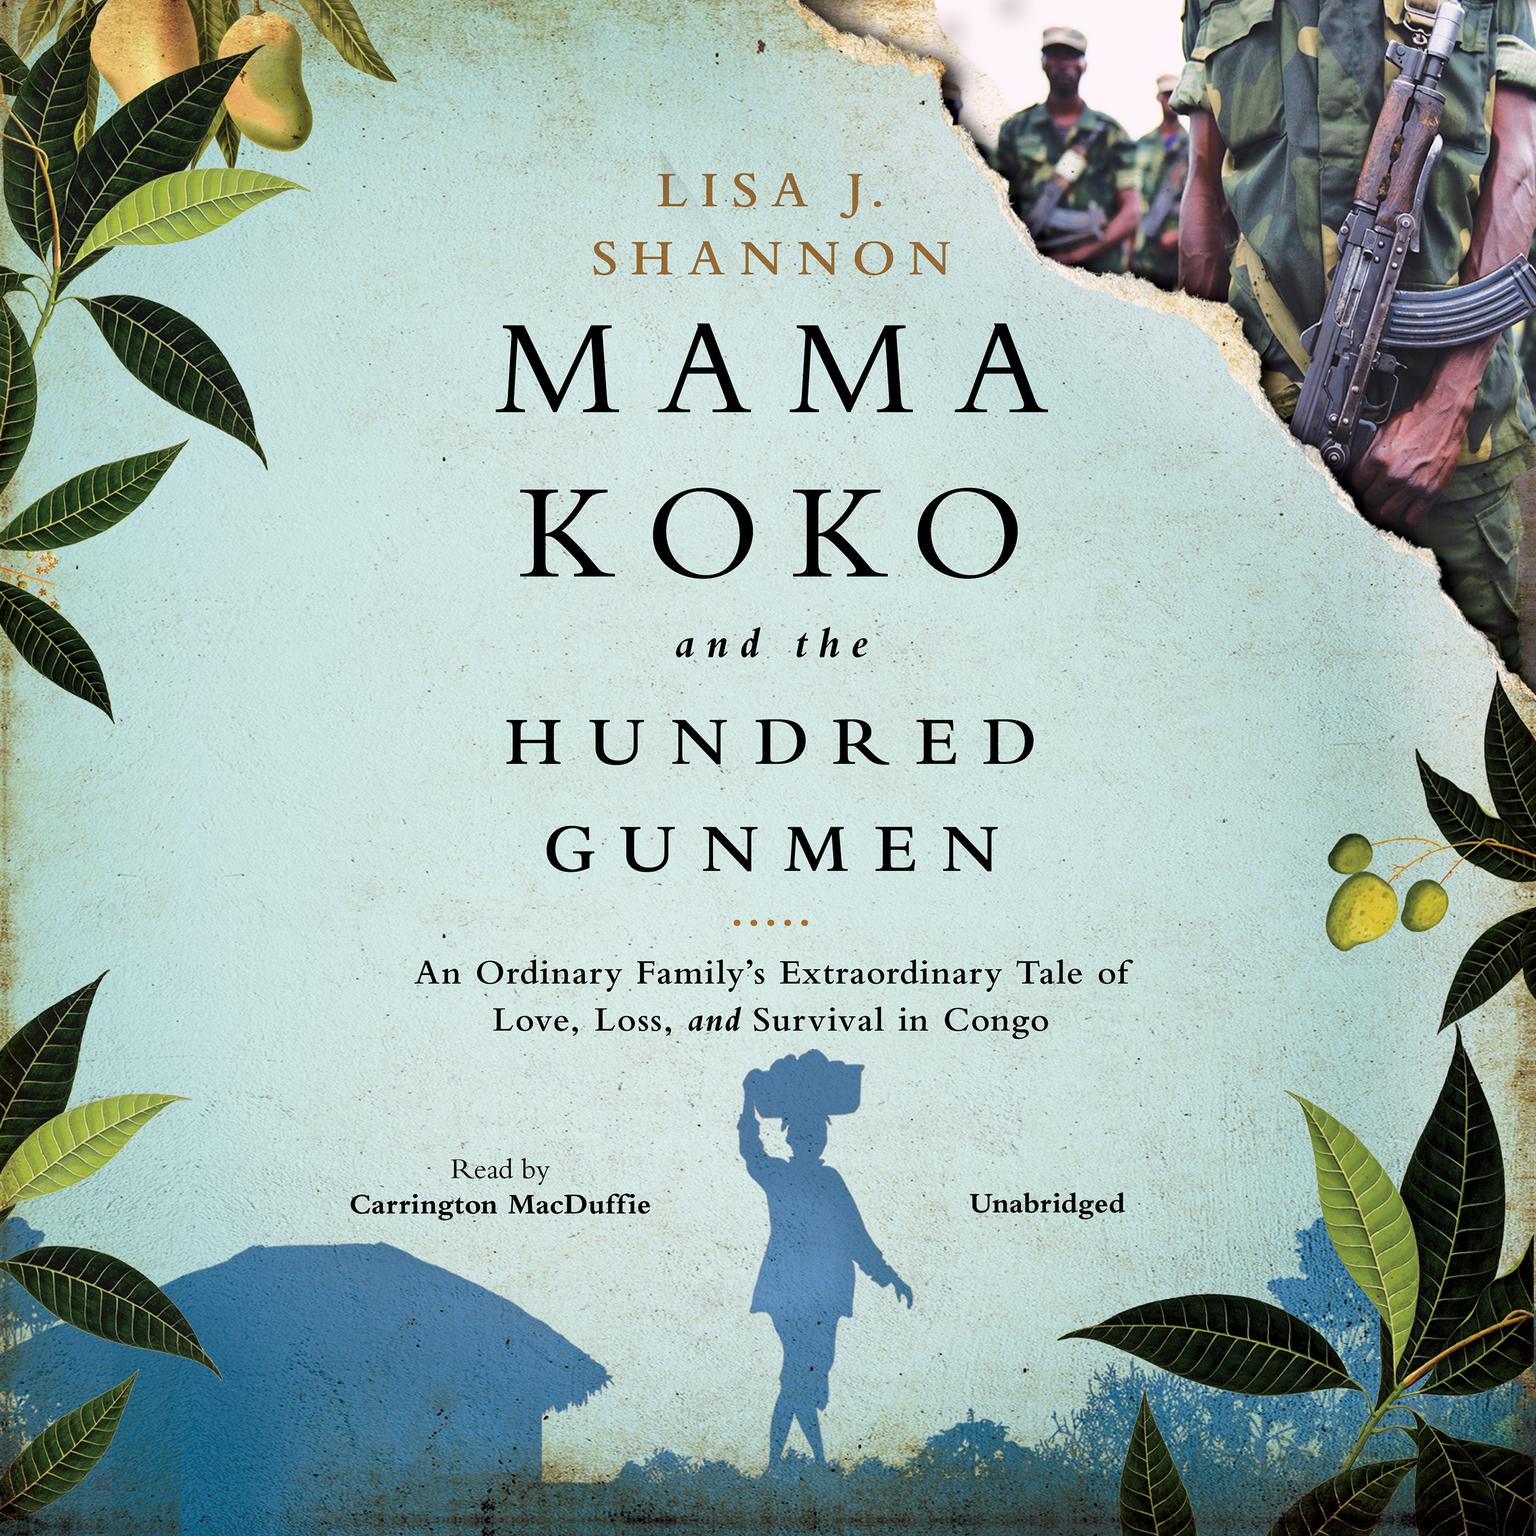 Mama Koko and the Hundred Gunmen: An Ordinary Family’s Extraordinary Tale of Love, Loss, and Survival in Congo Audiobook, by Lisa J. Shannon